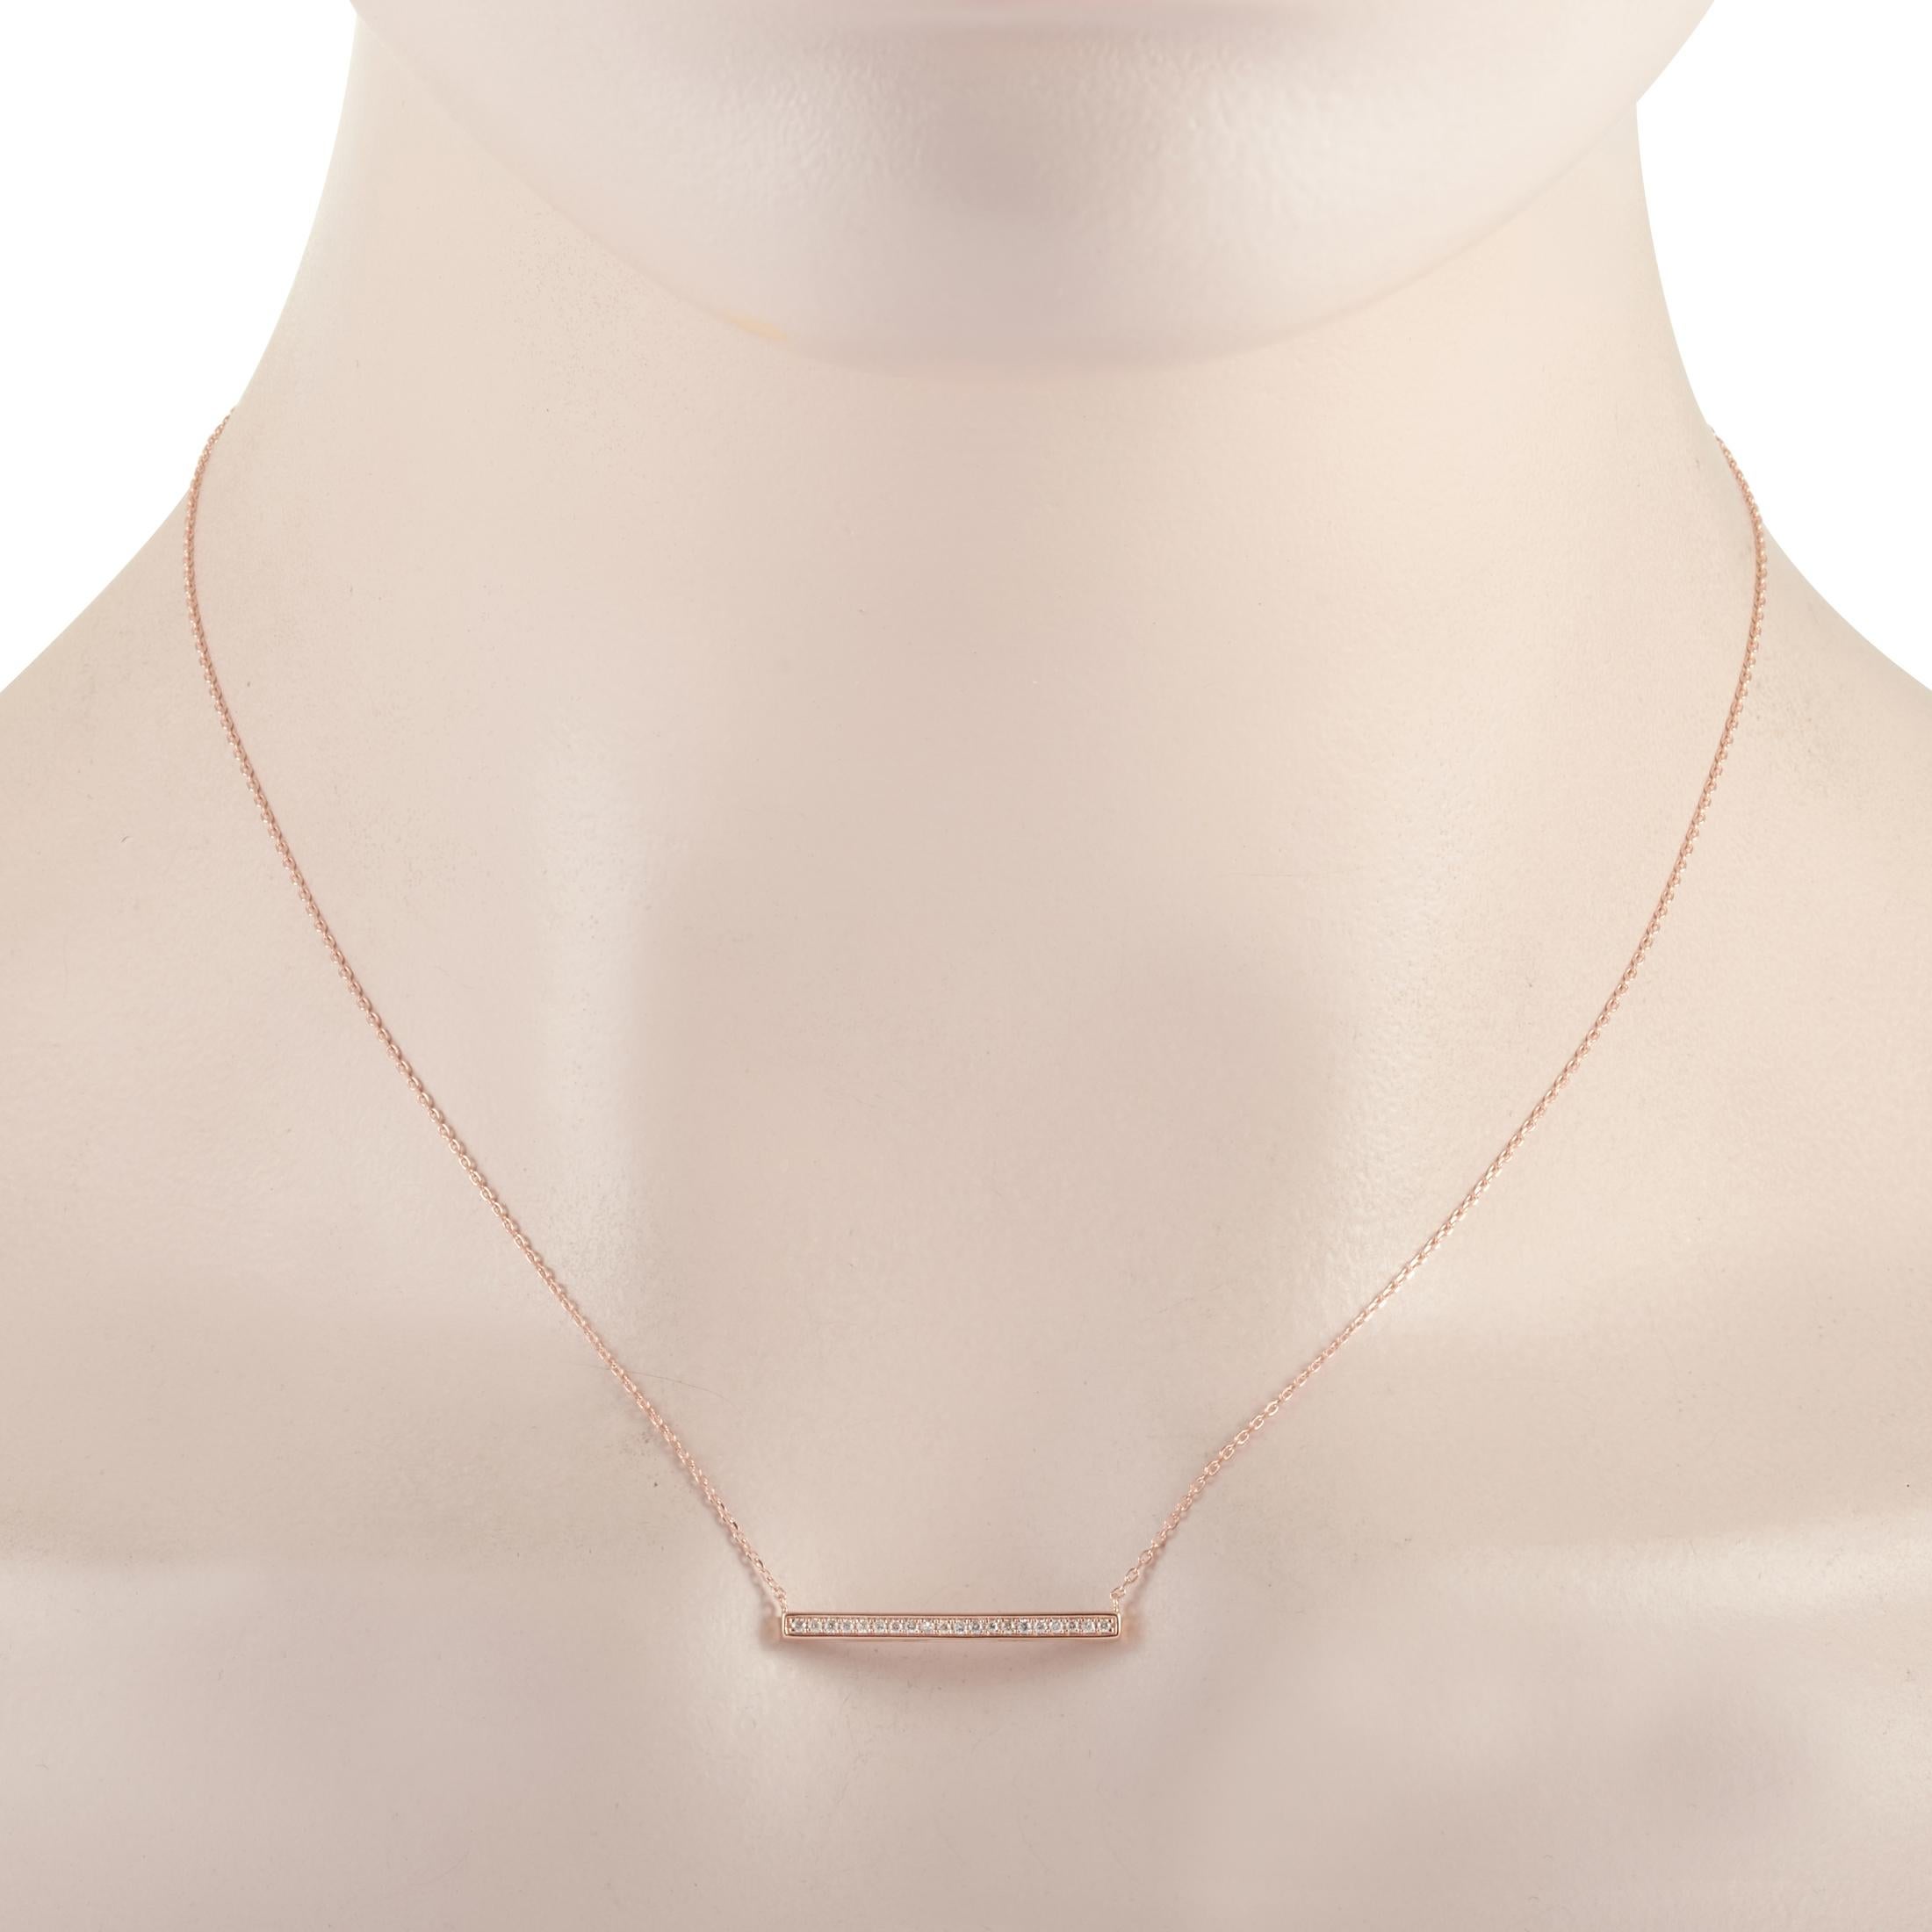 This LB Exclusive necklace is crafted from 14K rose gold and weighs 1.8 grams. It is presented with a 15” chain and boasts a pendant that measures 0.07” in length and 1” in width. The necklace is set with diamonds that total 0.10 carats.
 
